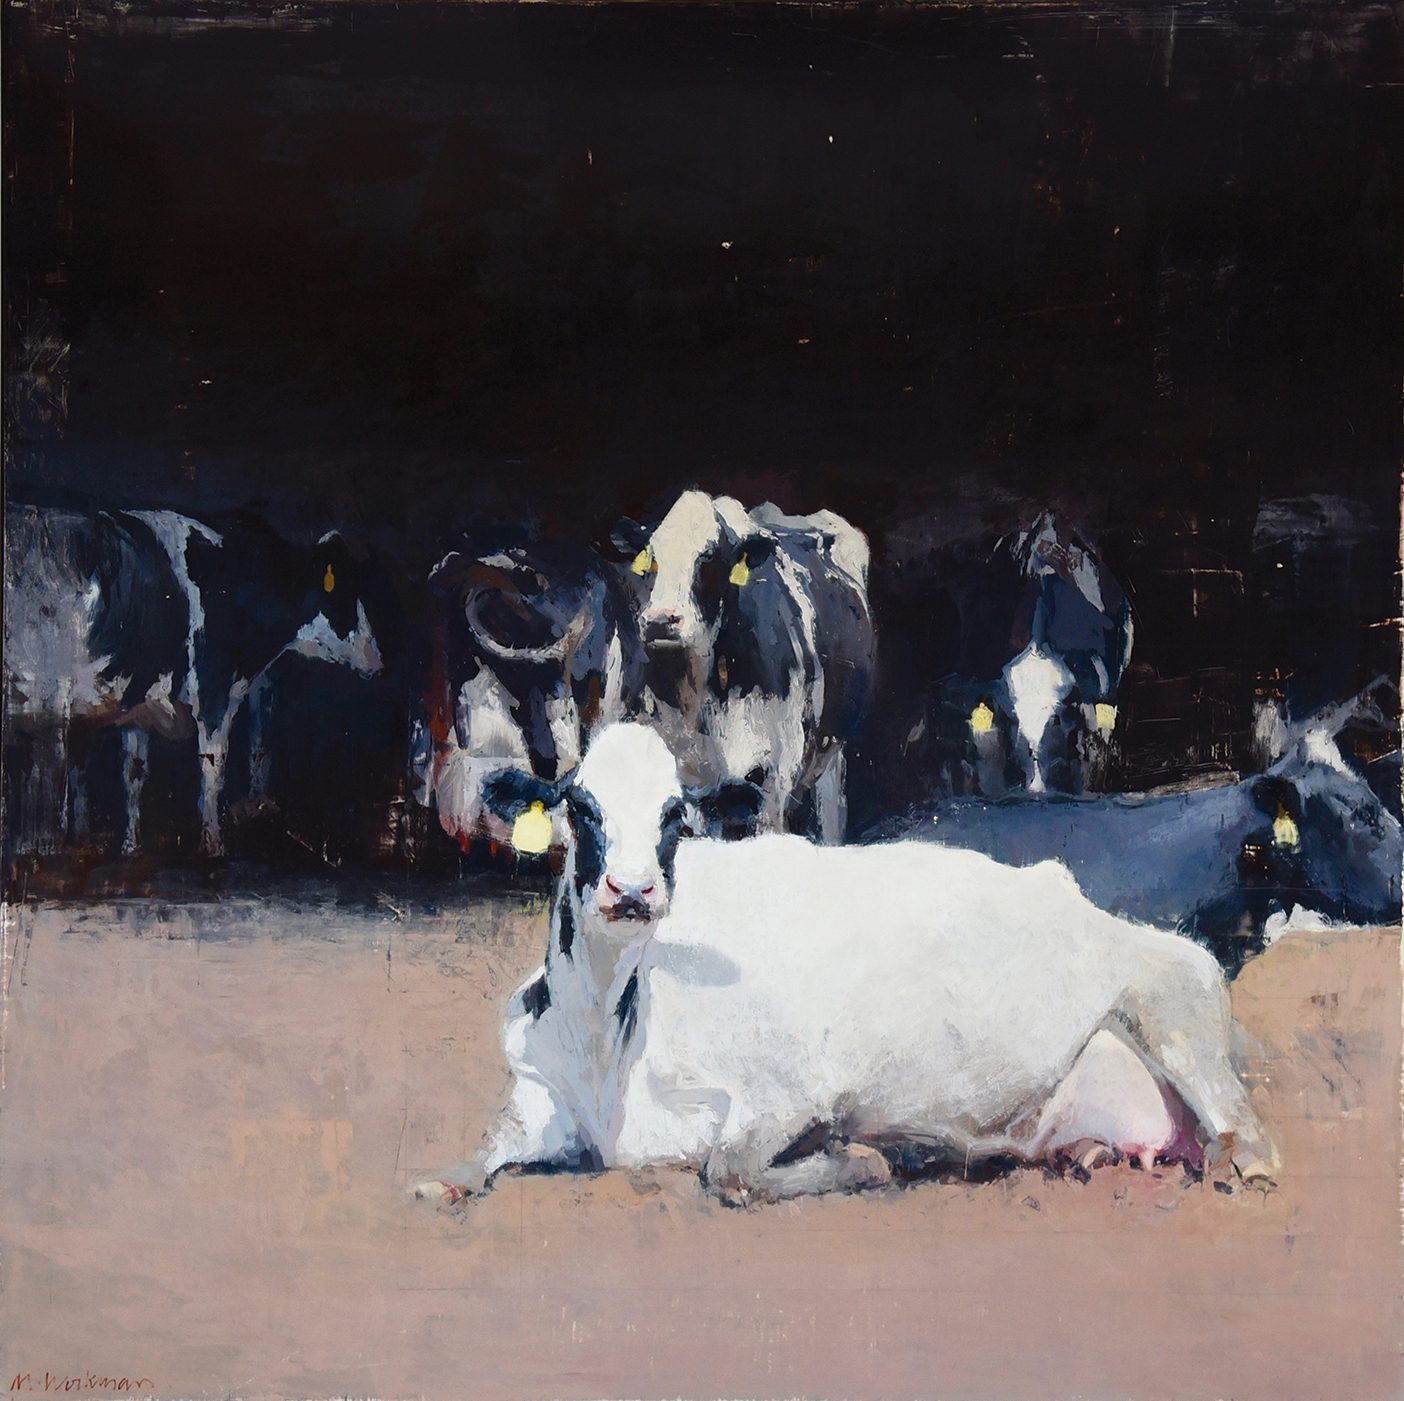 An oil painting of a cow laying on a field with a yellow tag on its ear, in the background are several cows with yellow tags as well.